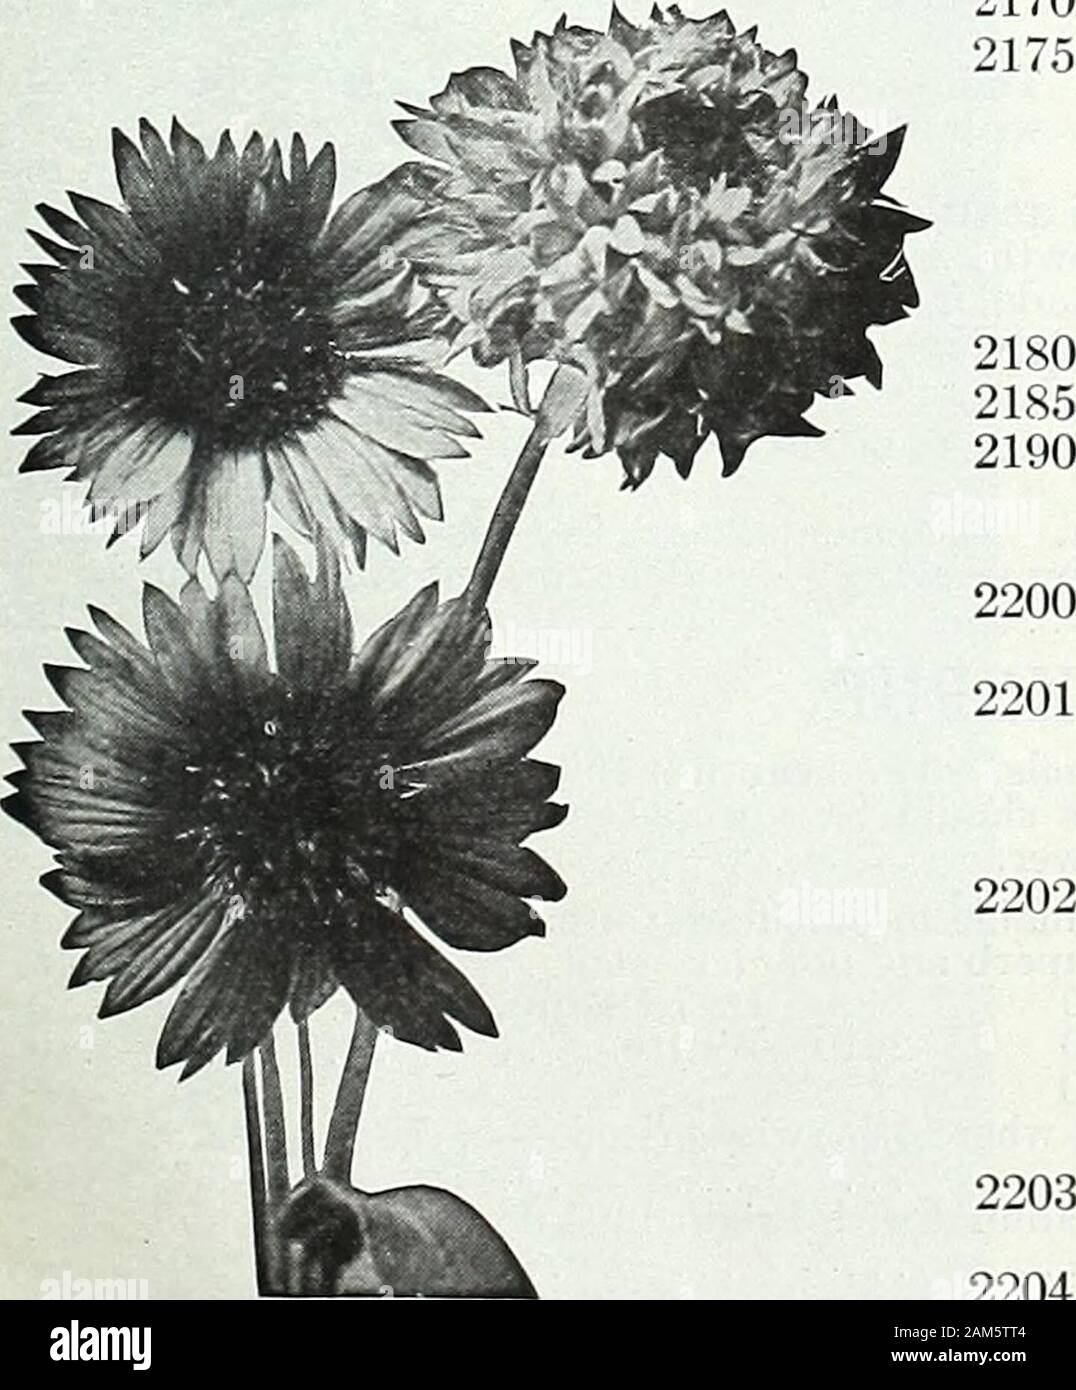 Farquhar's garden annual : 1922 . Eschscholtzia Farquhars Special Mixture. 2160 Farquhars Special Mixture, including all the new shades. ... Oz., $1.50; j oz., .50; .15 Mixed ilb.,$1.25;oz., .40; .10 2165 Collection of 6 varieties, separate, our selection. .50 FEVERFEW. (Matricaria eximia.) 2170 Silver Ball. Double white. 1| ft 2175 Golden Ball. Large heads of golden-yeUow flowers EUPHORBIA heterophylla. {Mexican Fire Plant.)Showy plant with glossy green leaves, which aboutmid-summer become tipped with orange-scarlet.2 to 3 ft ioz., .35; variegata. (Snow-on-the-Moimtain.) Foliage beauti-fully Stock Photo